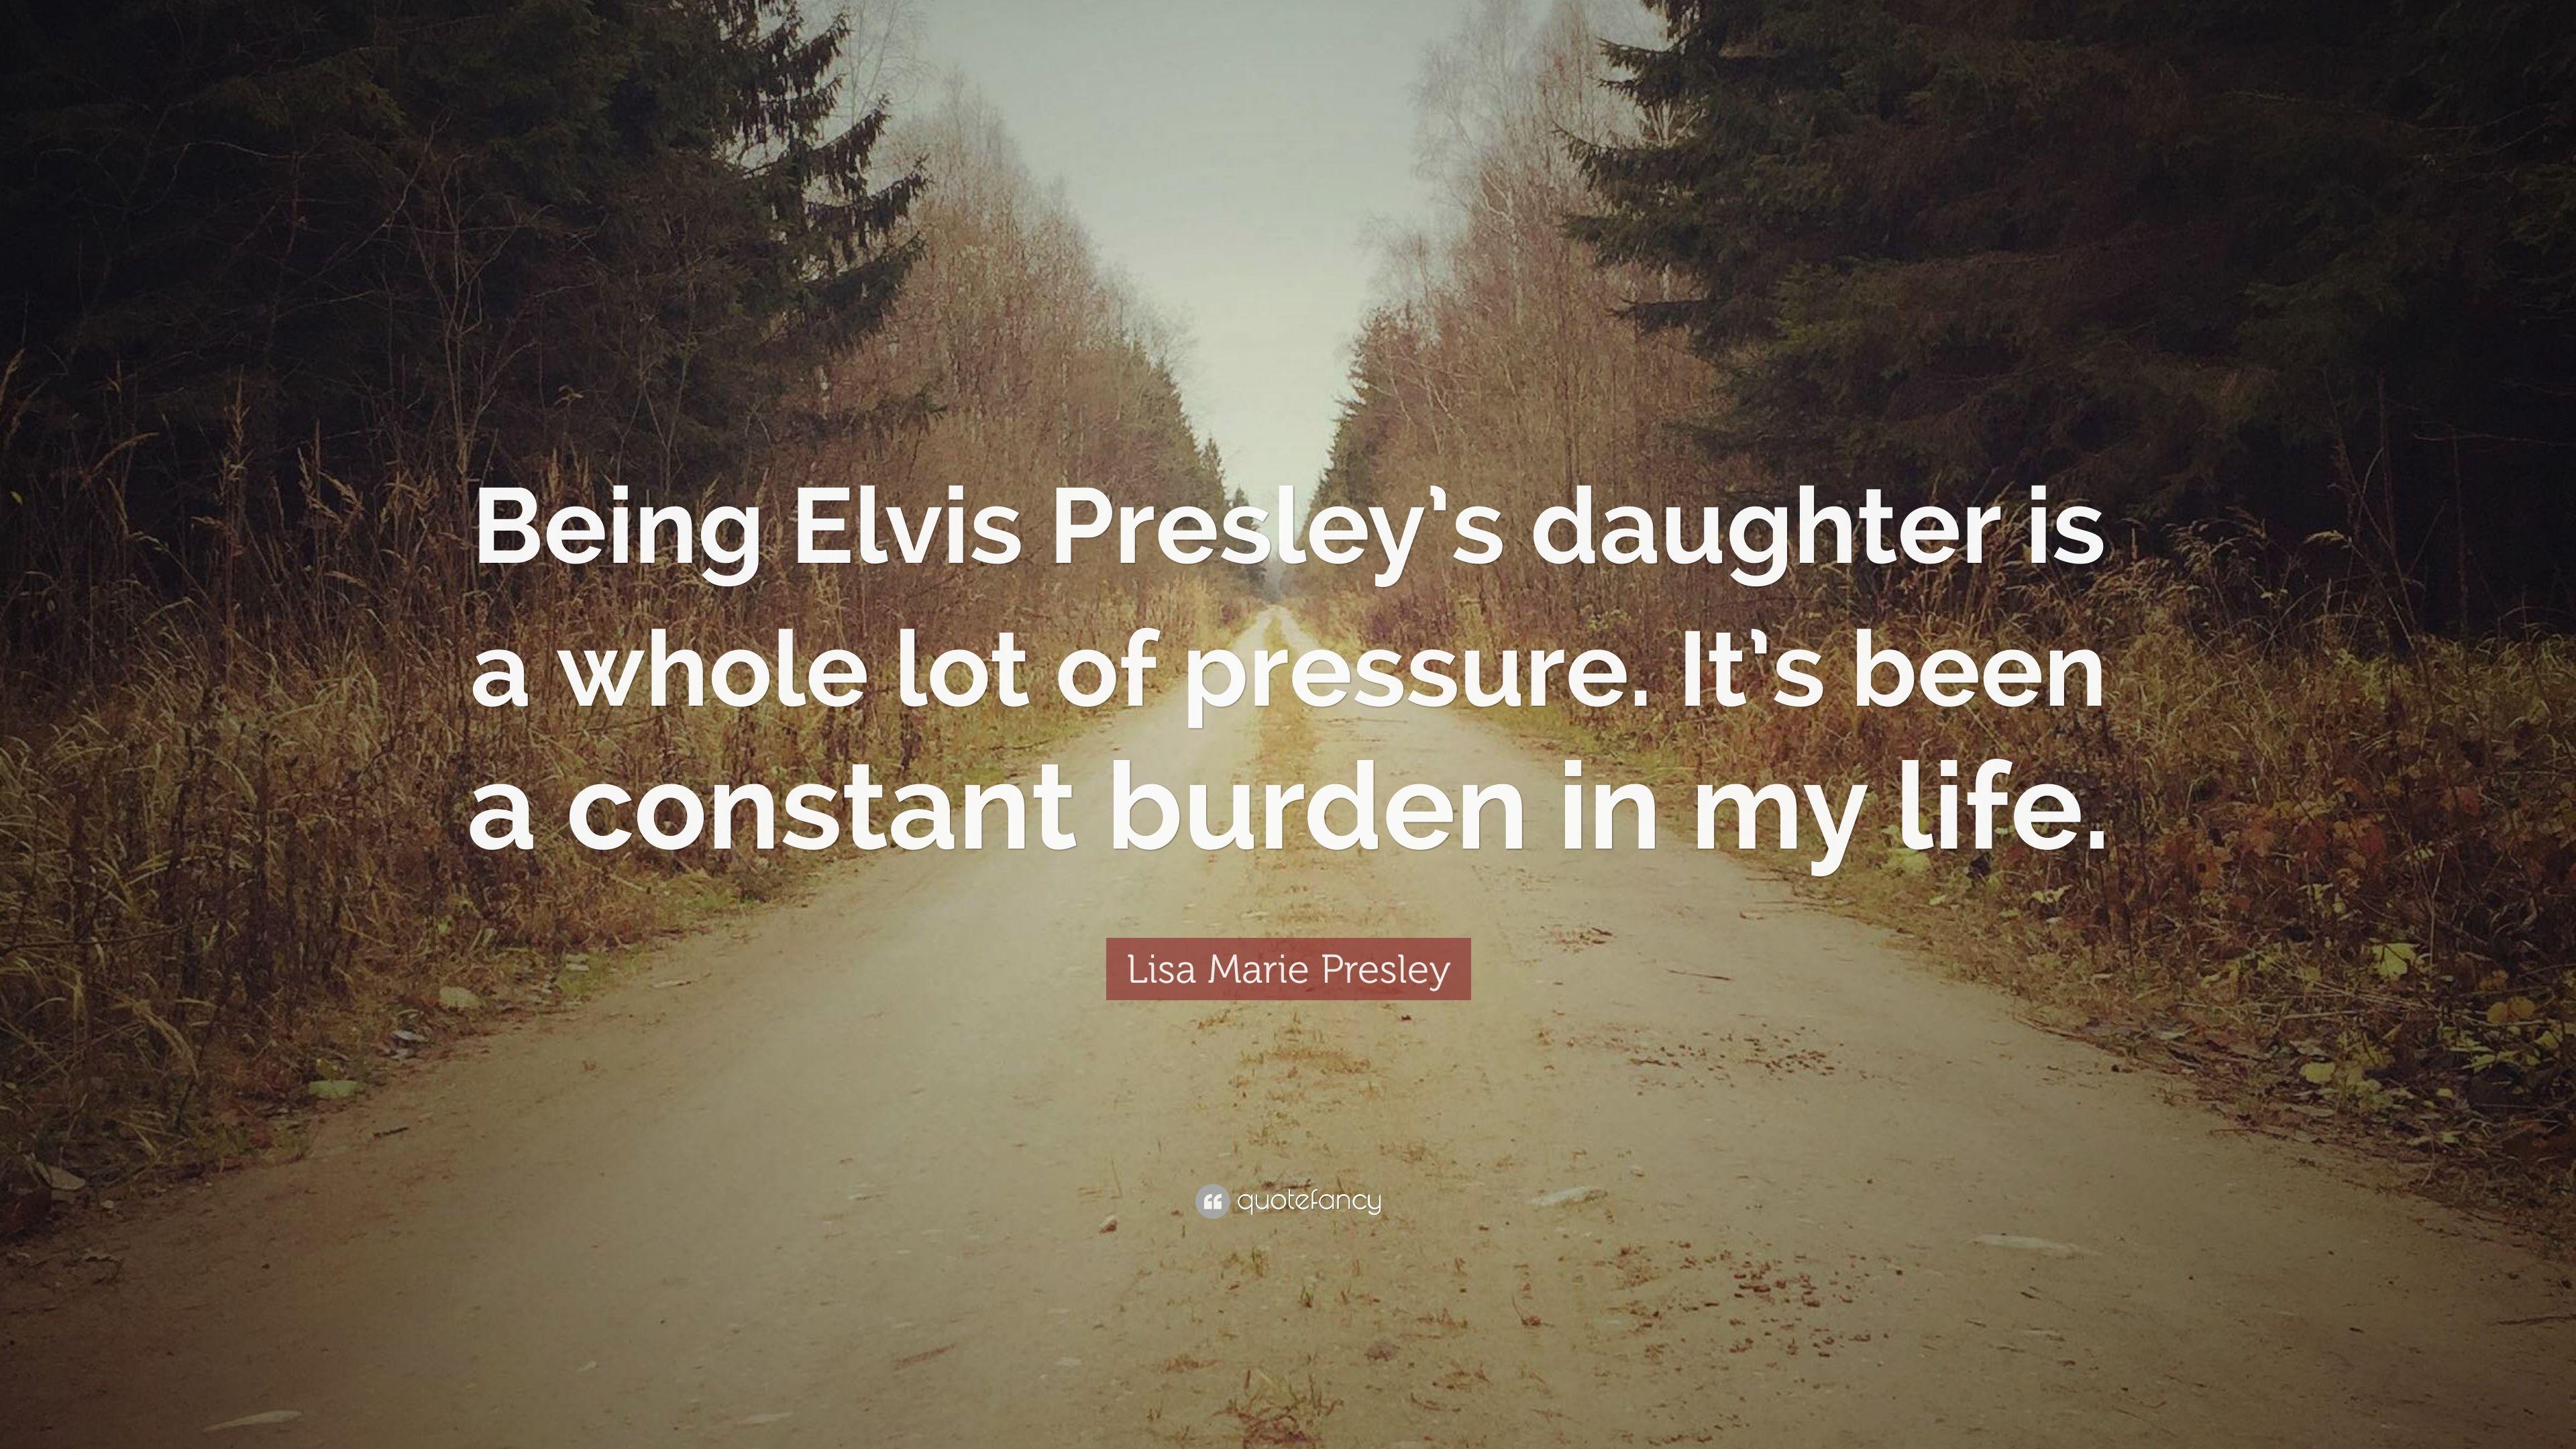 Lisa Marie Presley Quote: “Being Elvis Presley's daughter is a whole